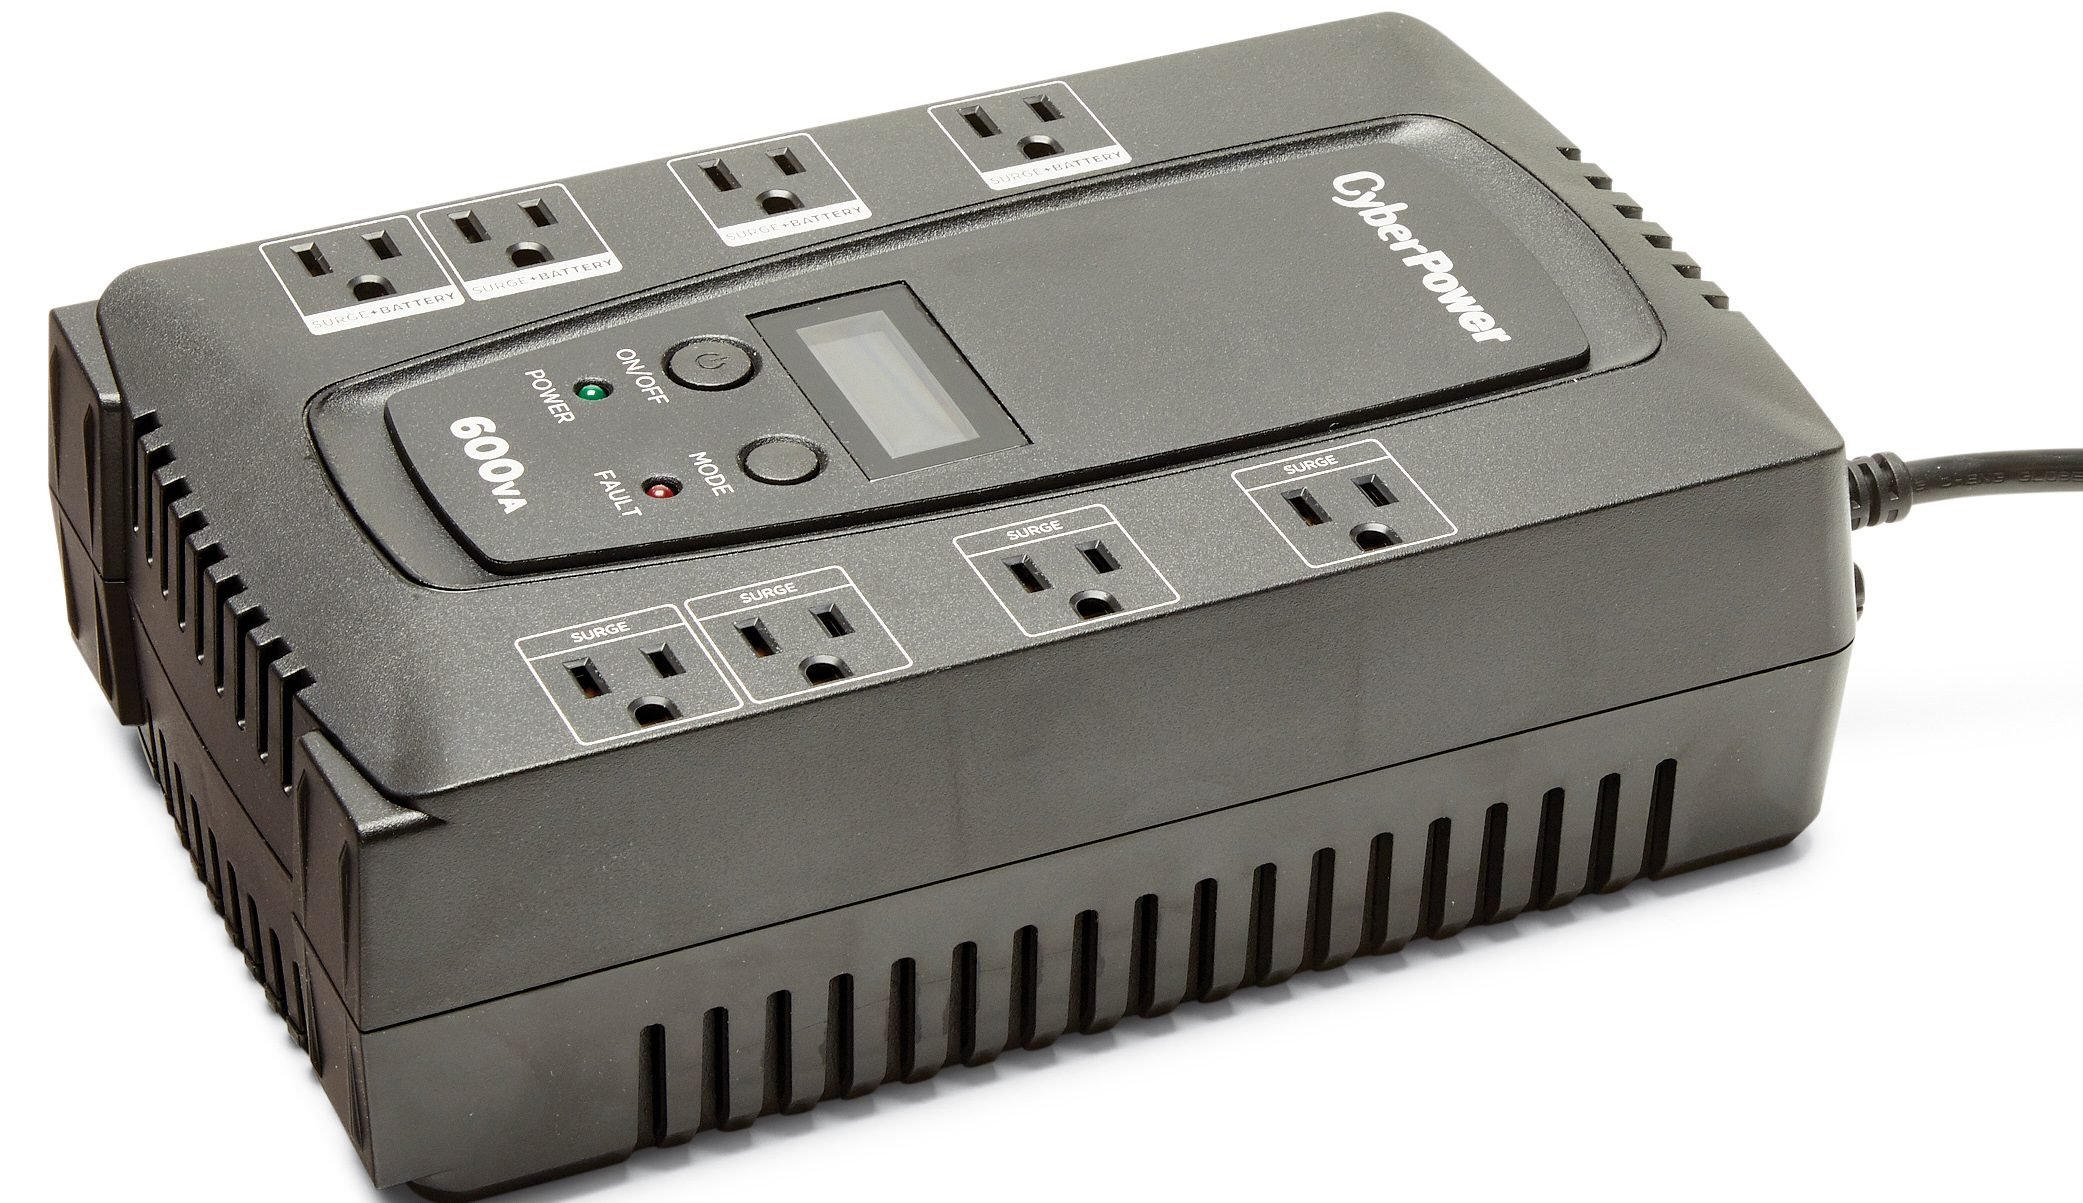 How Long Will an Uninterruptible Power Supply Last? We Tested 3 of Them